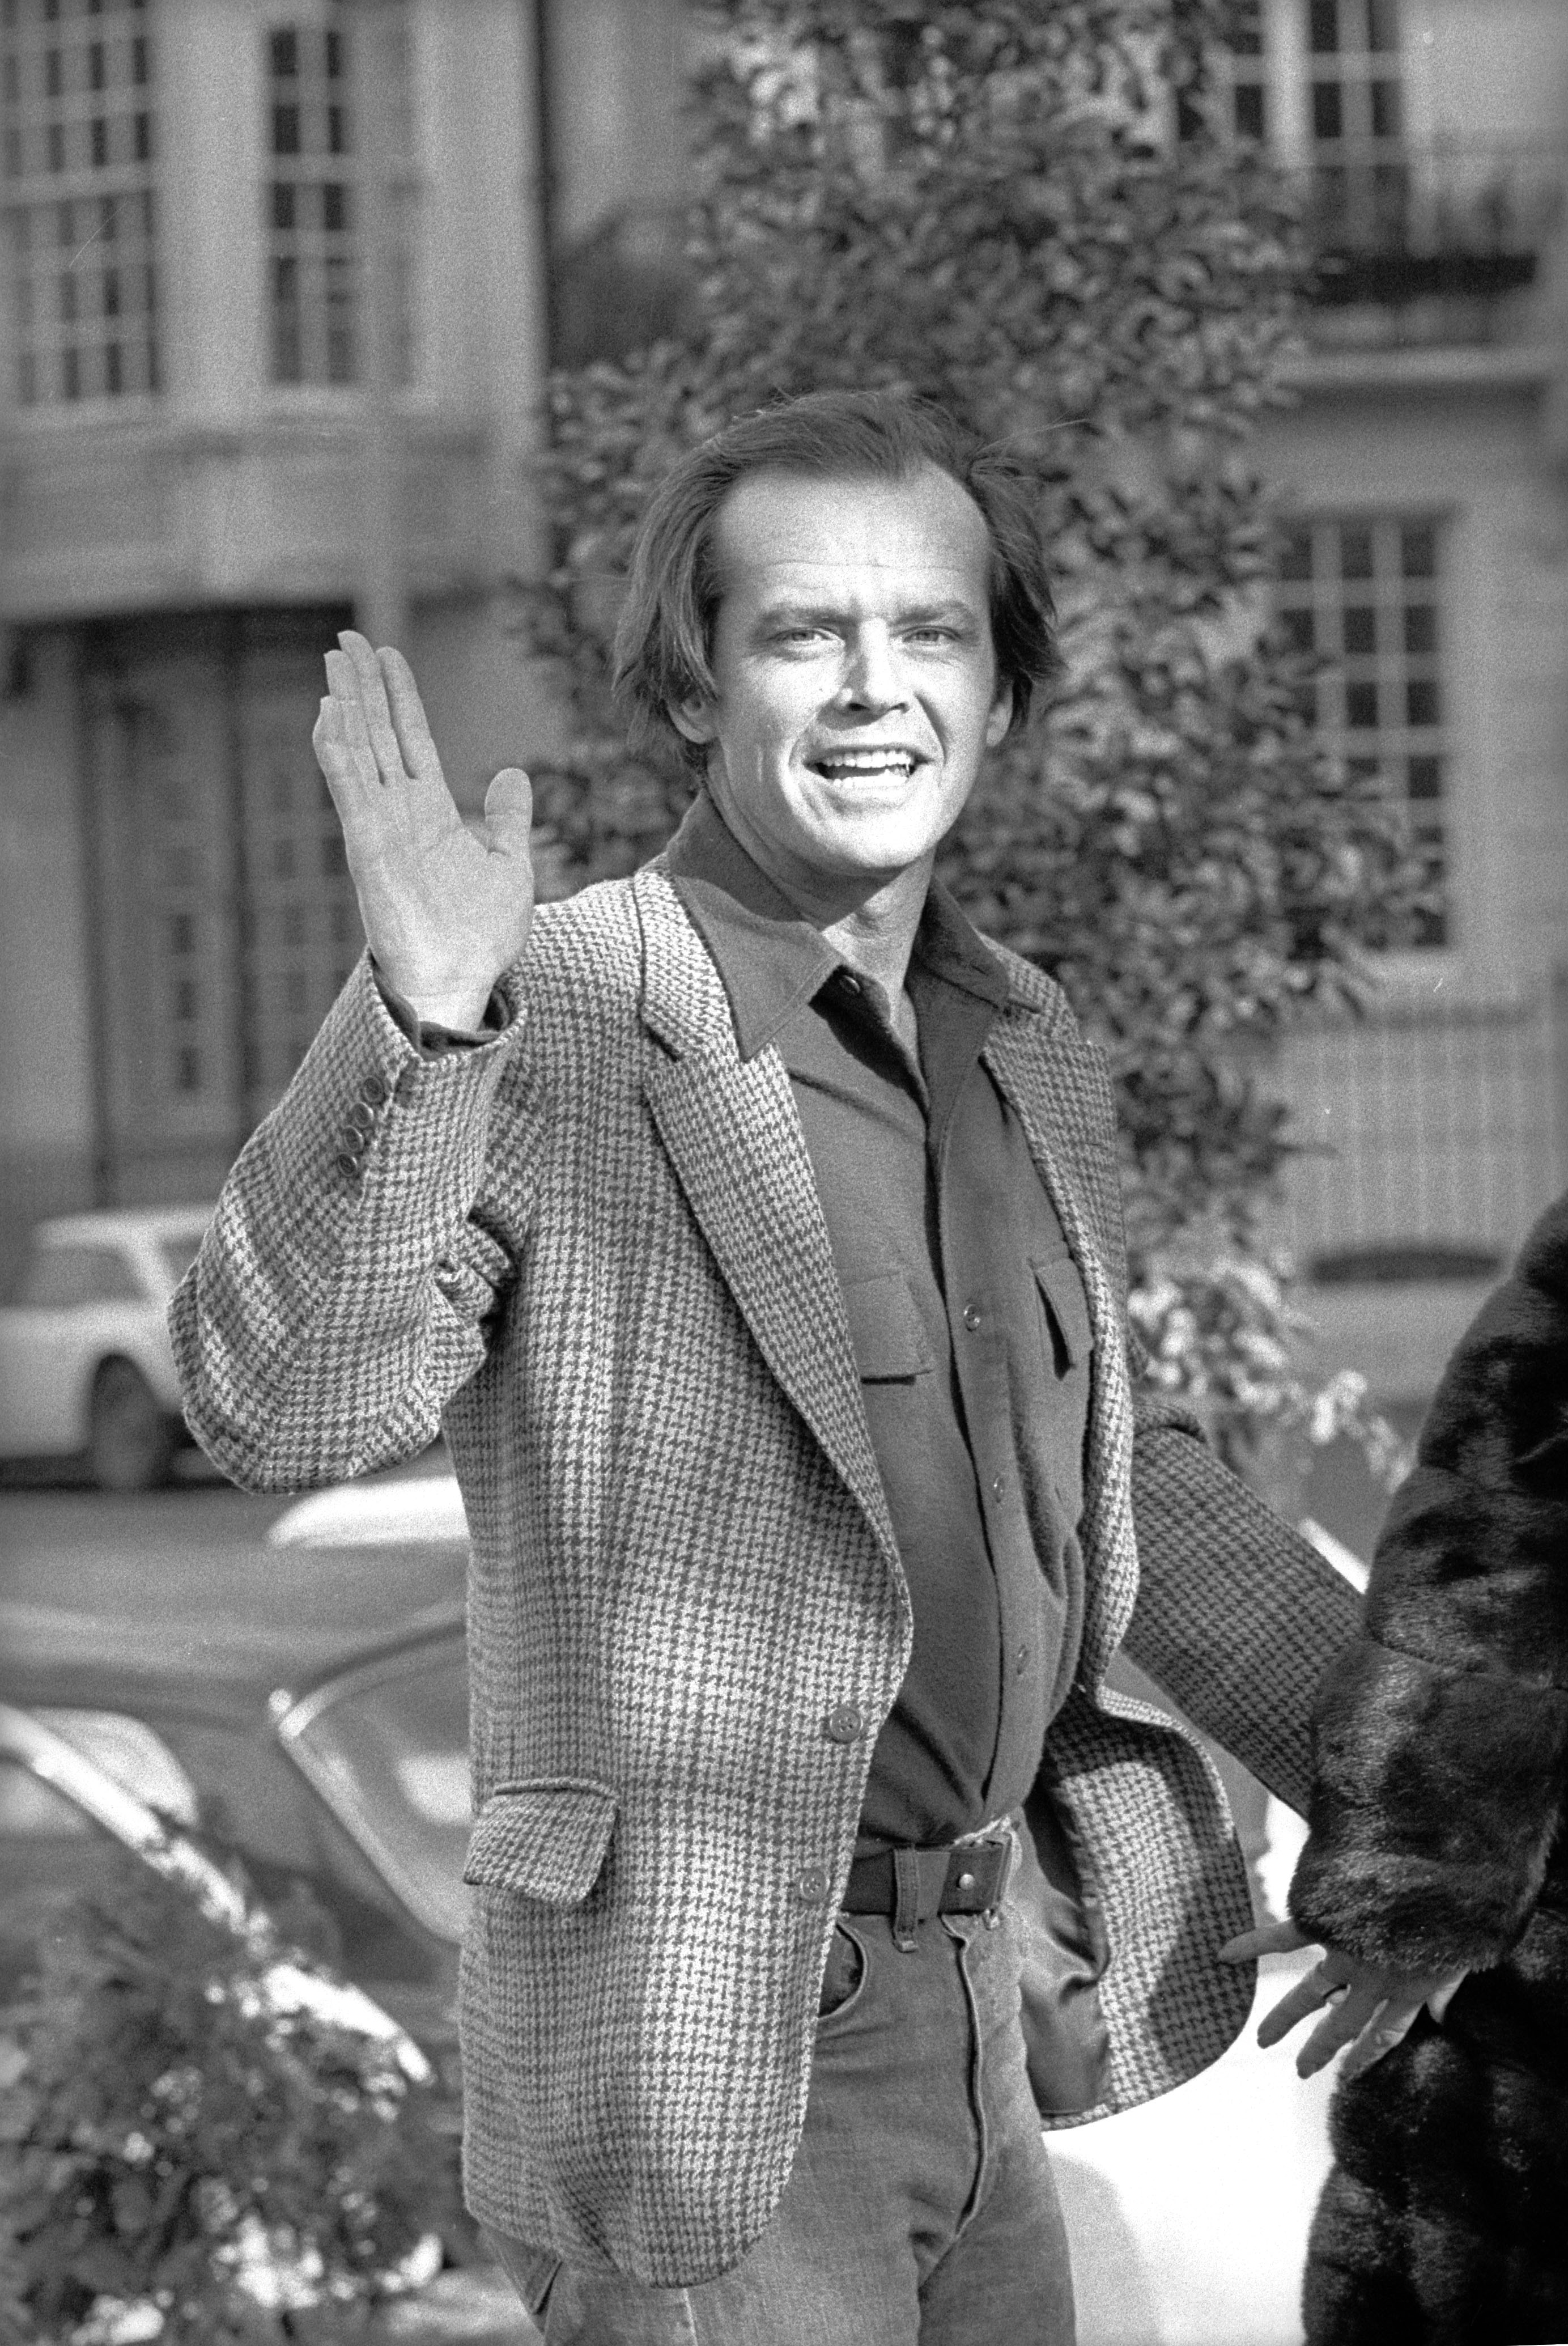 Jack Nicholson at the press conference for 'One Flew Over the Cuckoo's Nest', February 9, 1976 | Source: Getty Images